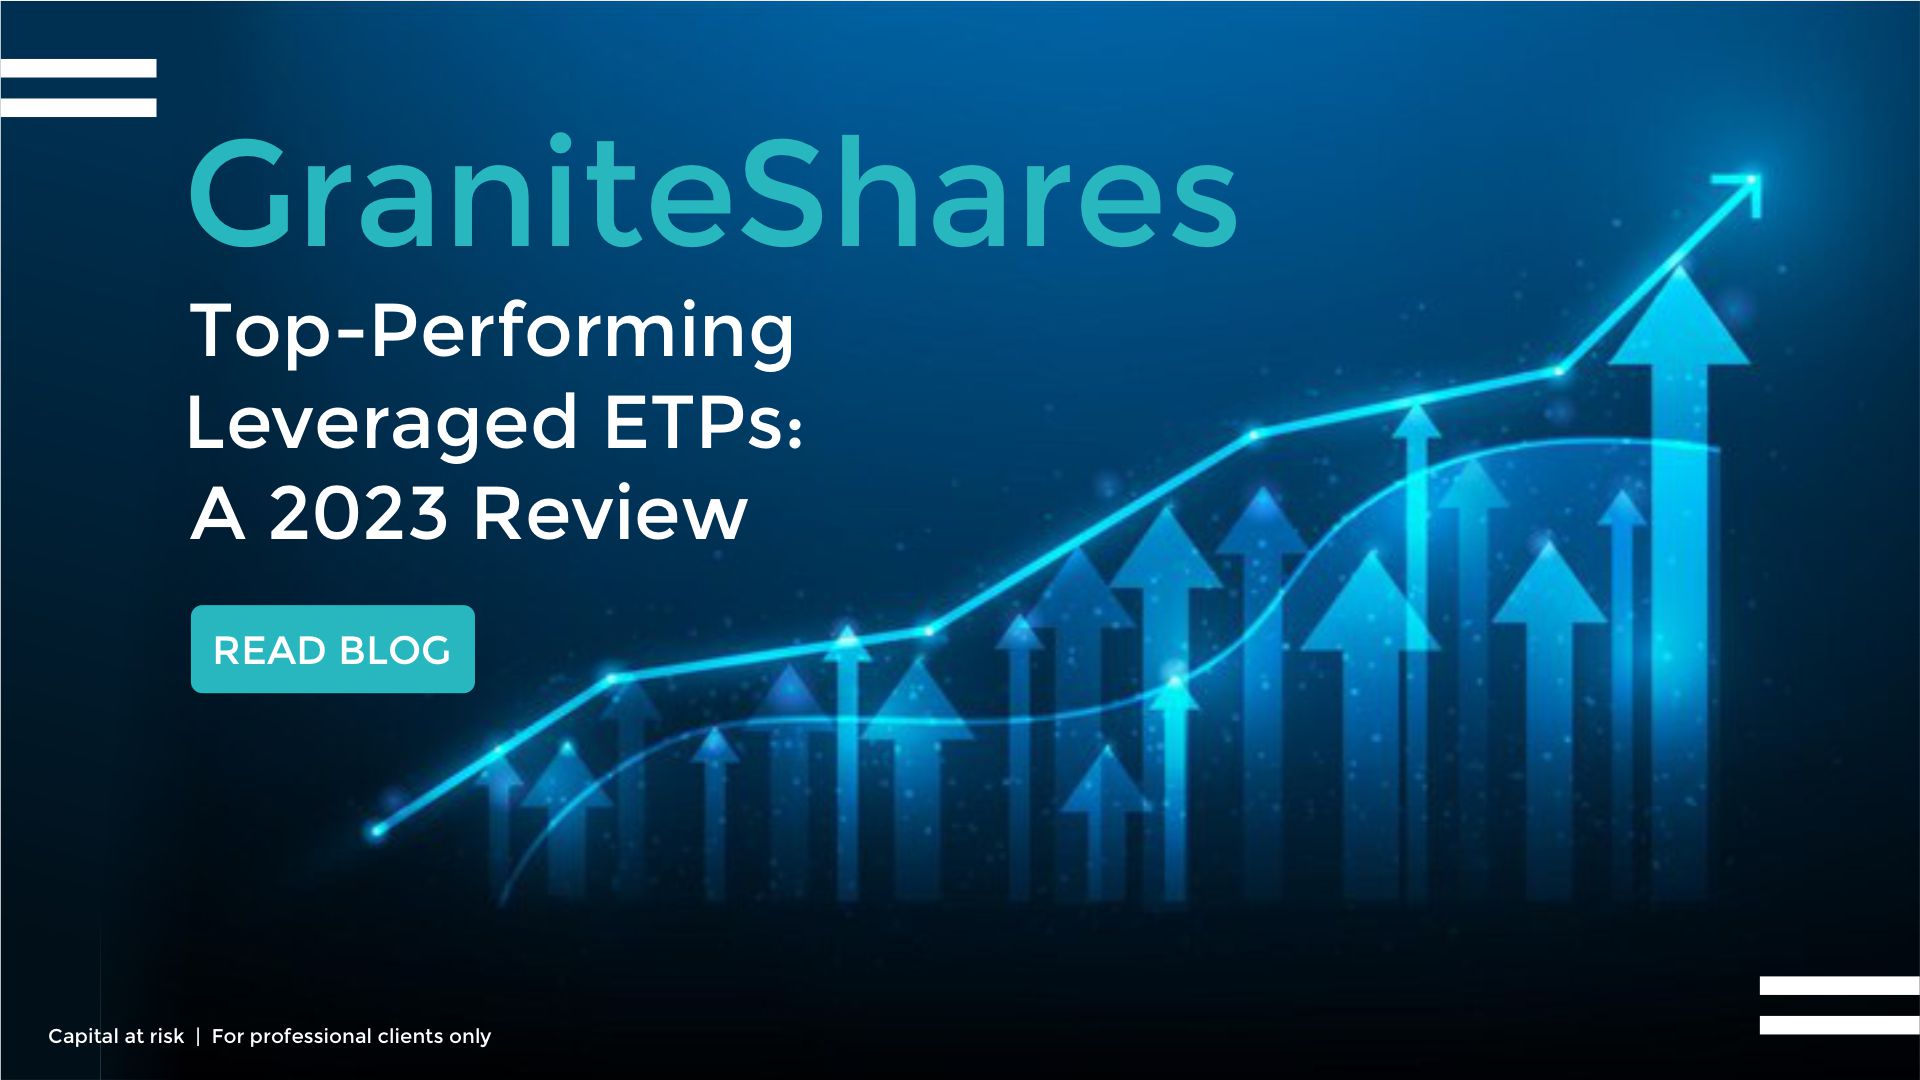 GraniteShares' Top-Performing Leveraged ETPs: A 2023 Review